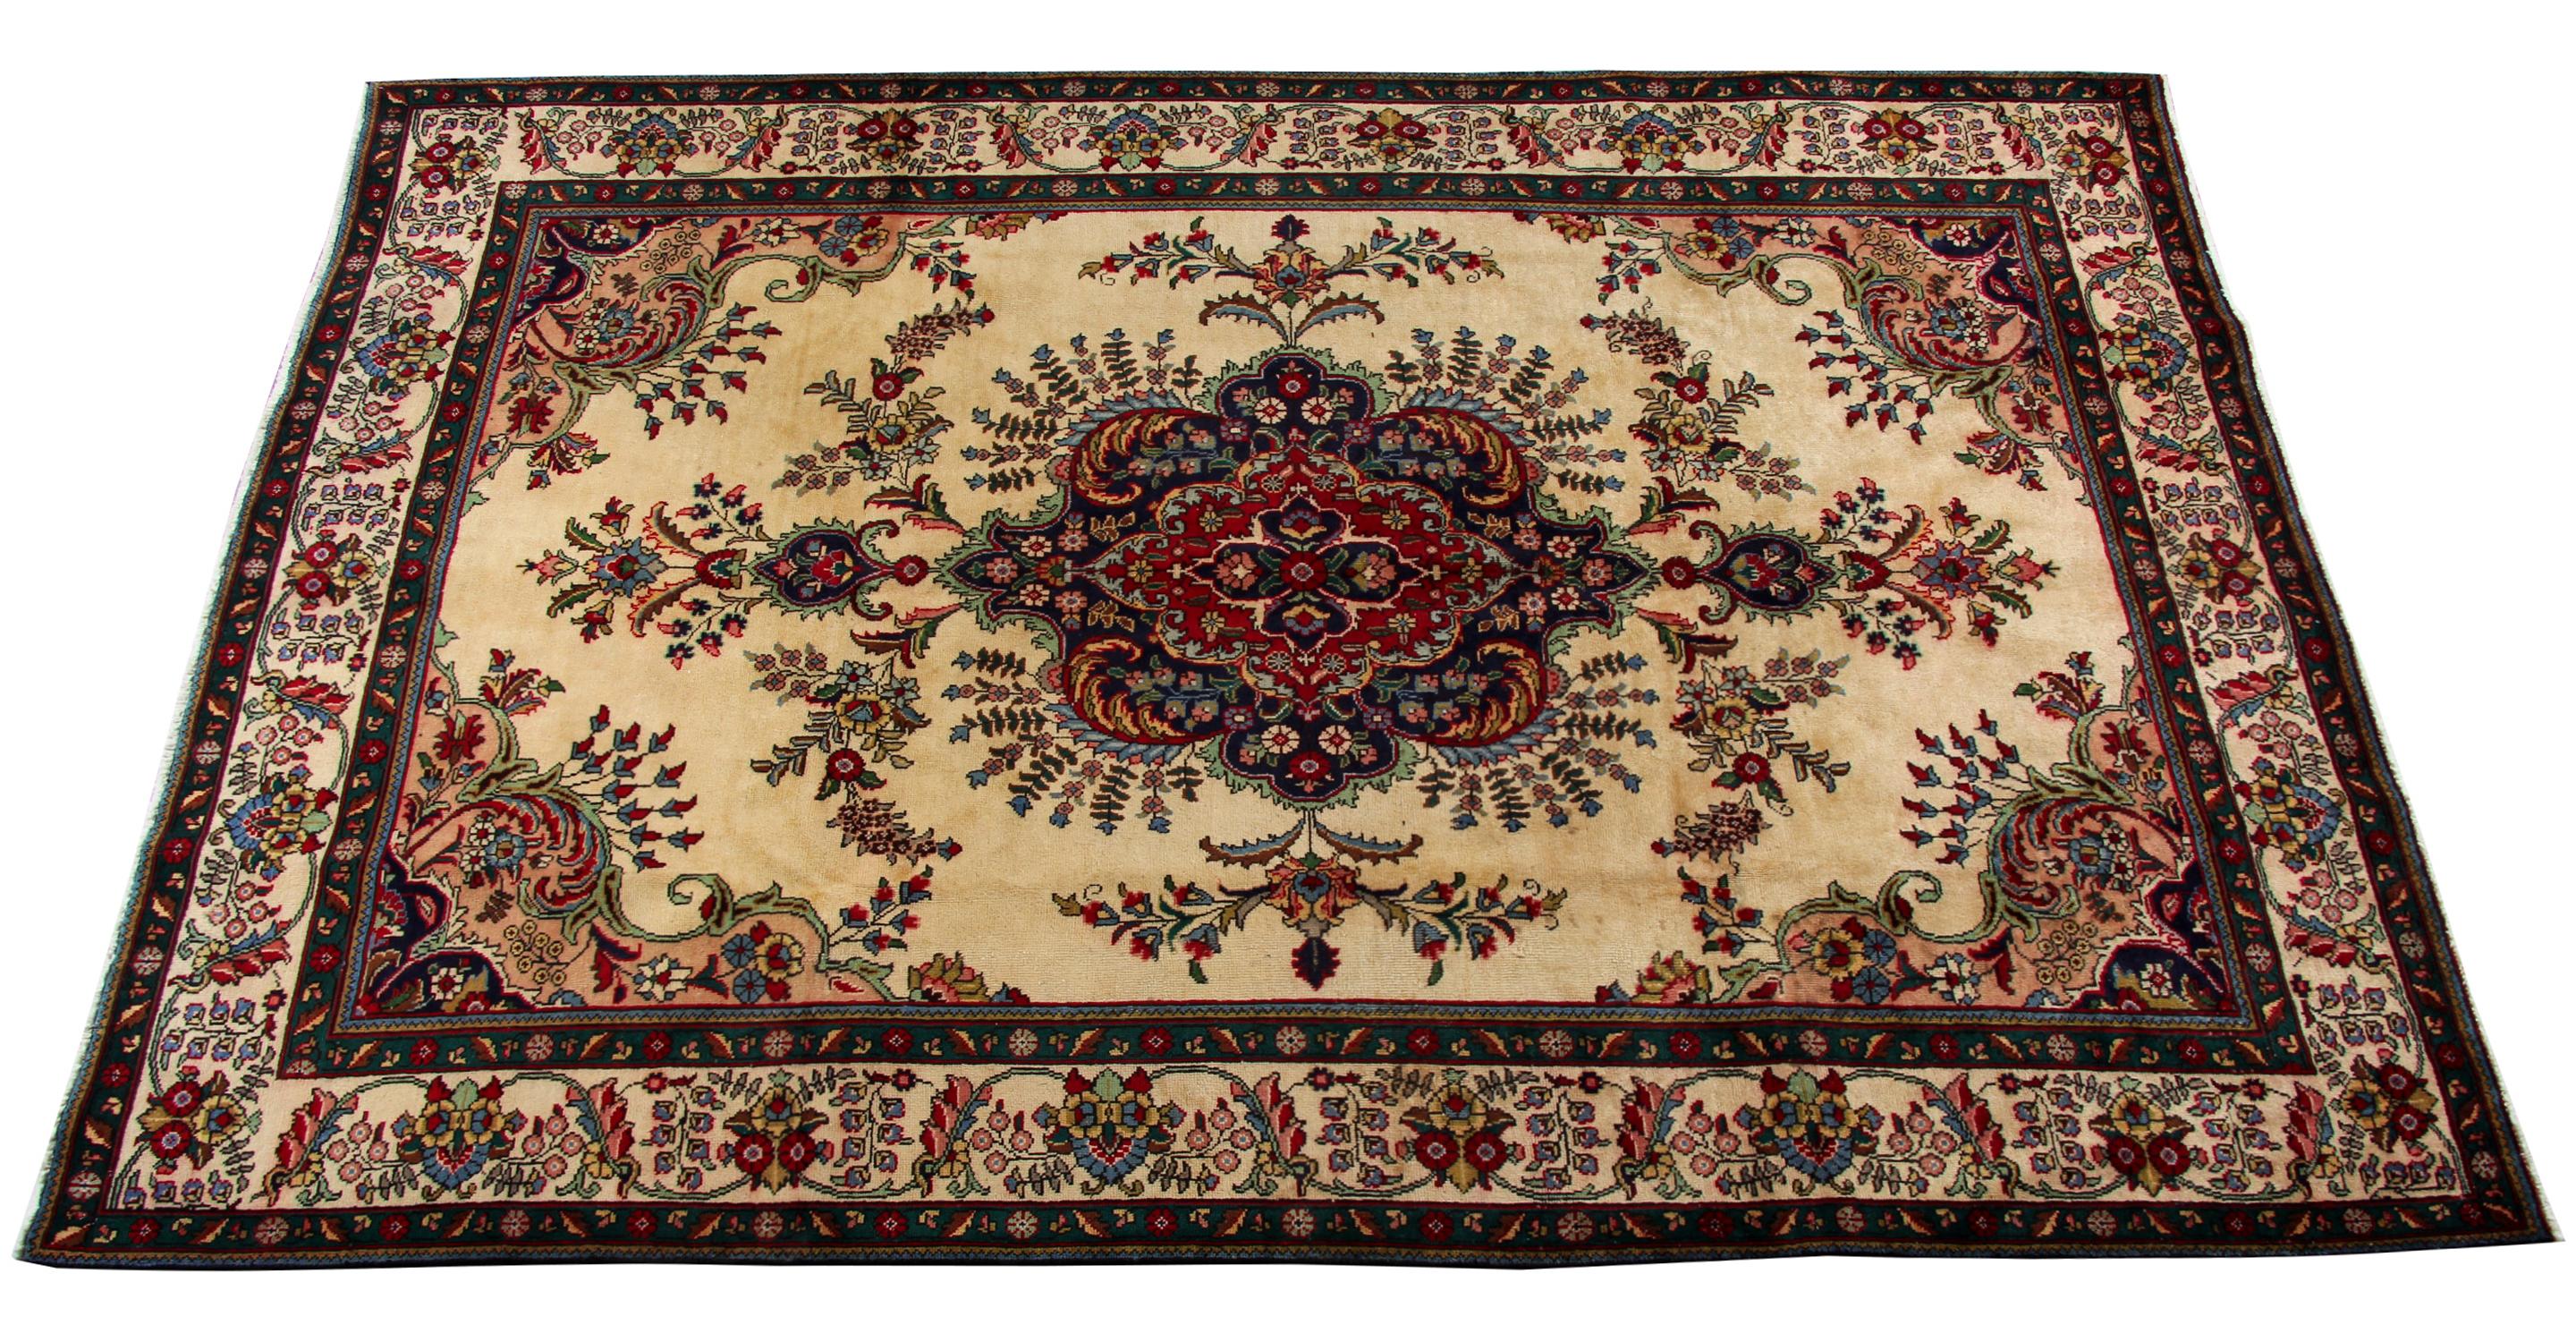 This beautiful design is a fantastic example of handwoven rugs from the 1970s. It features a tremendous central medallion adorned with flowers and foliate scrolls. The accent colours of blue. red, orange and green contrast beautifully with the